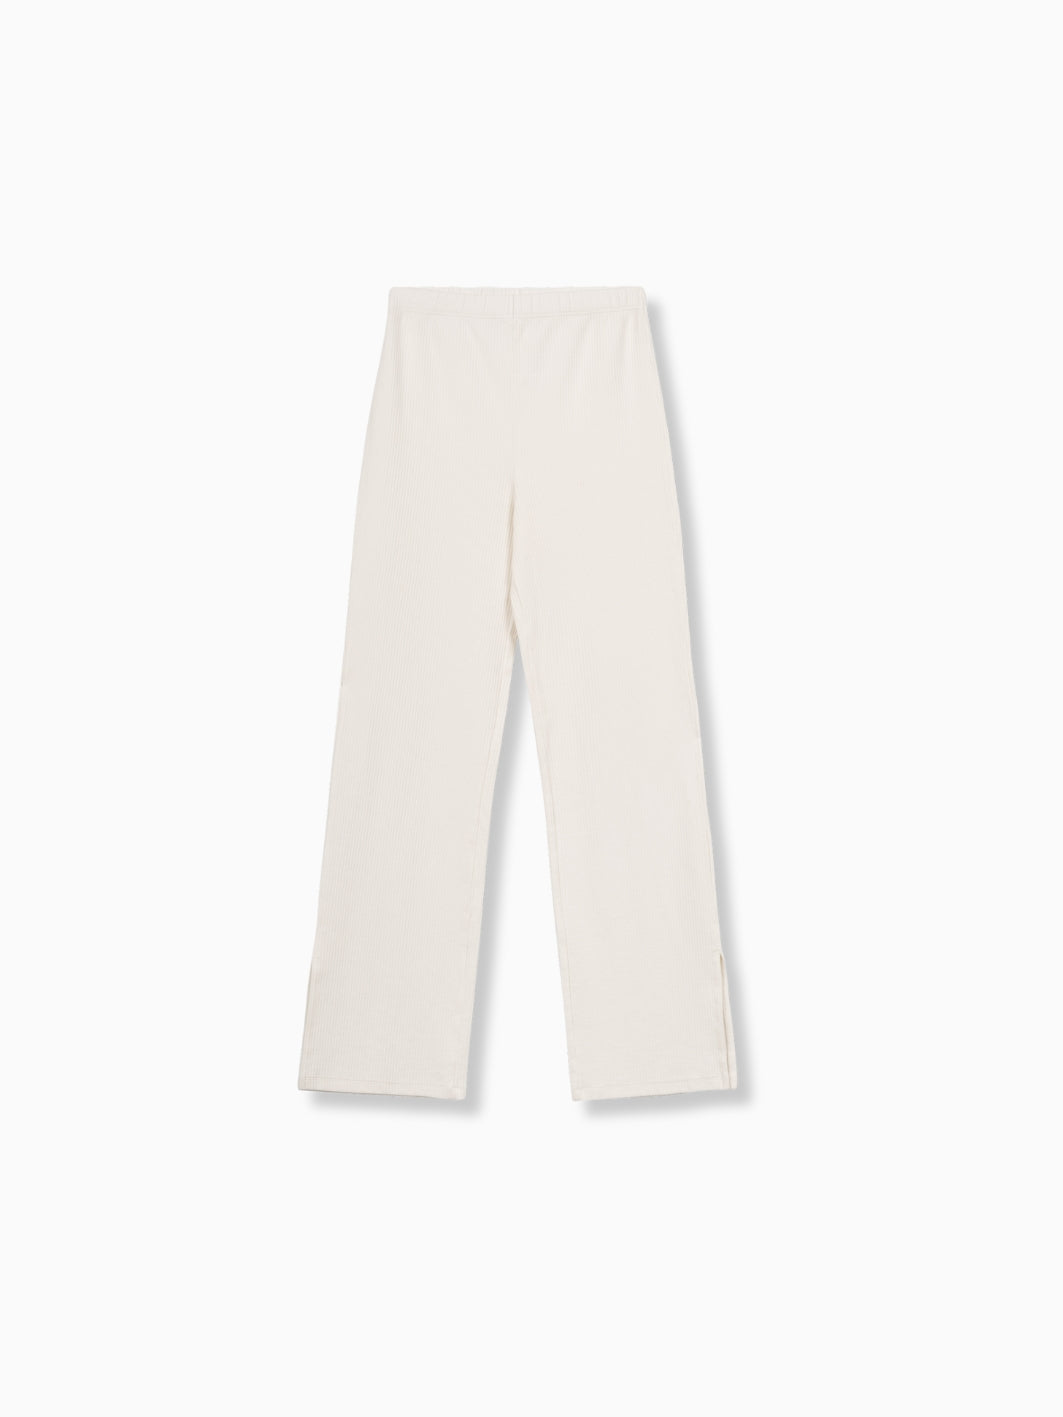 Ribbed Flowy Pants - FAMVIBES 